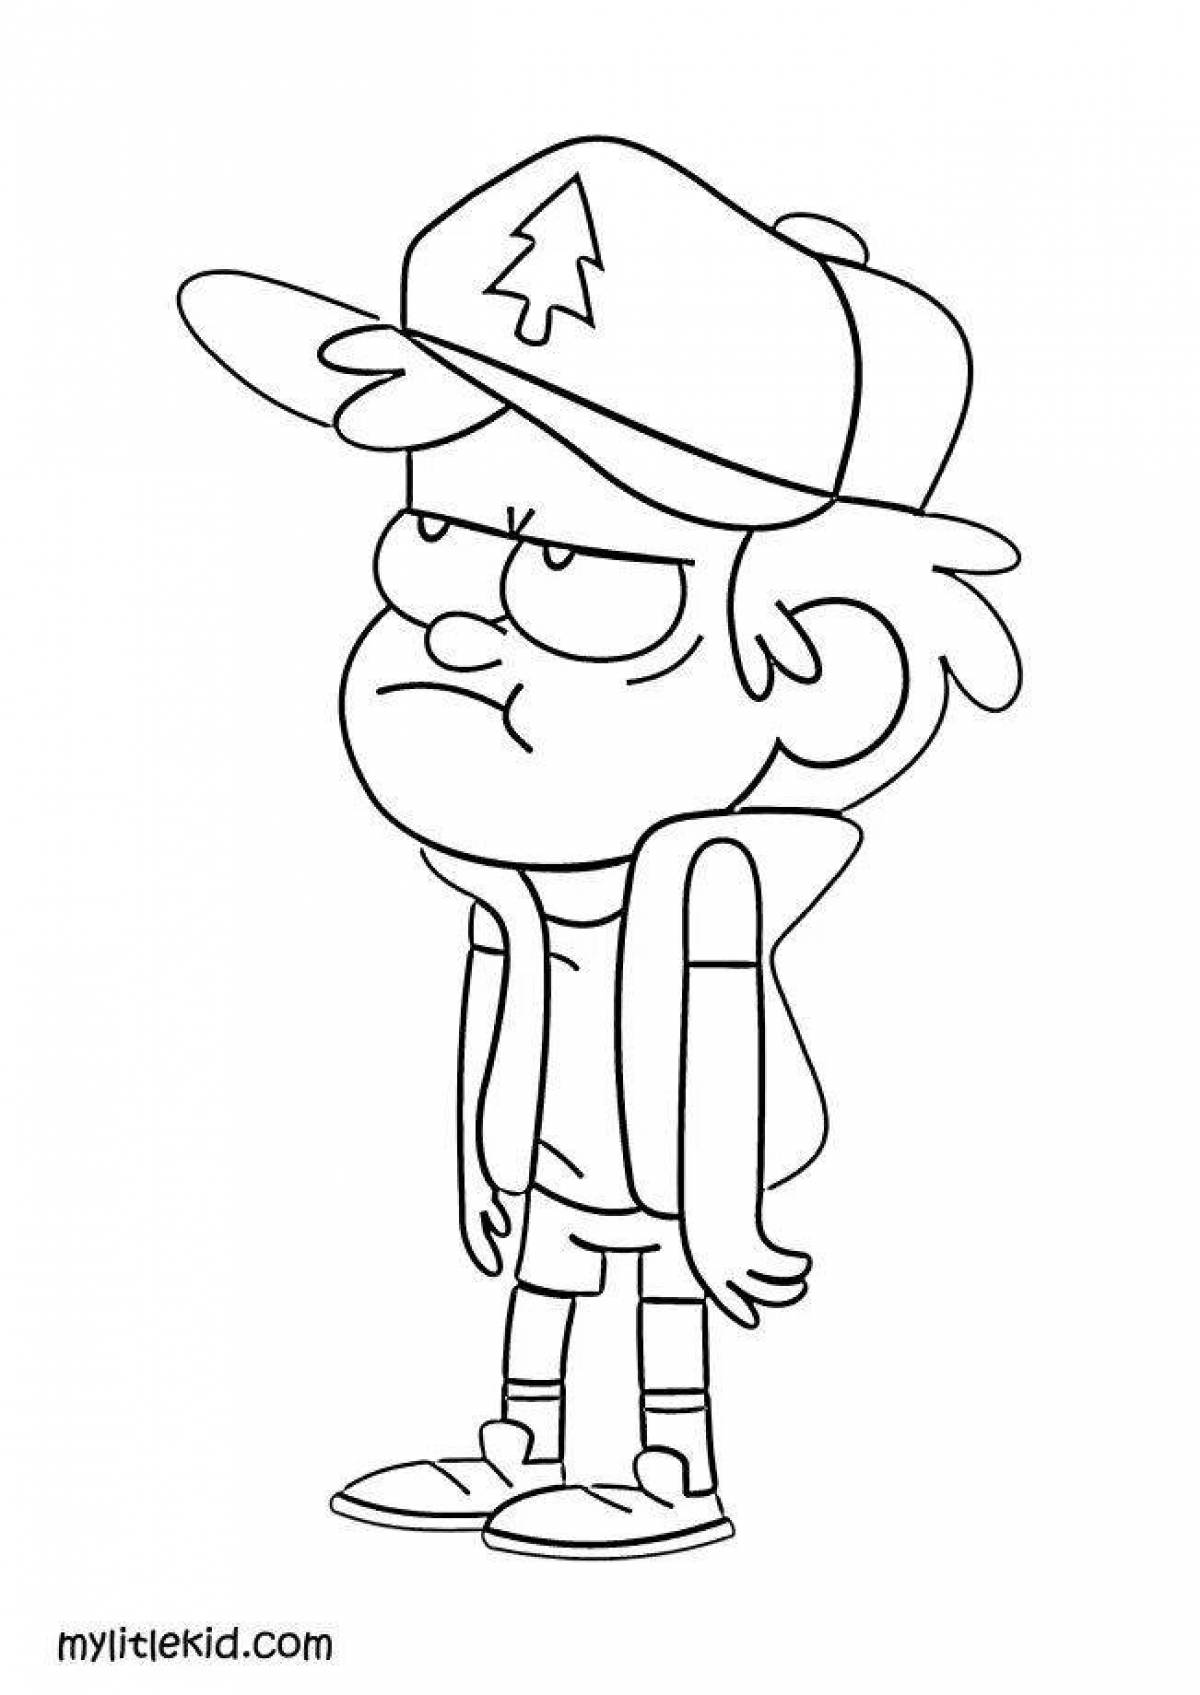 Jovial dipper coloring page